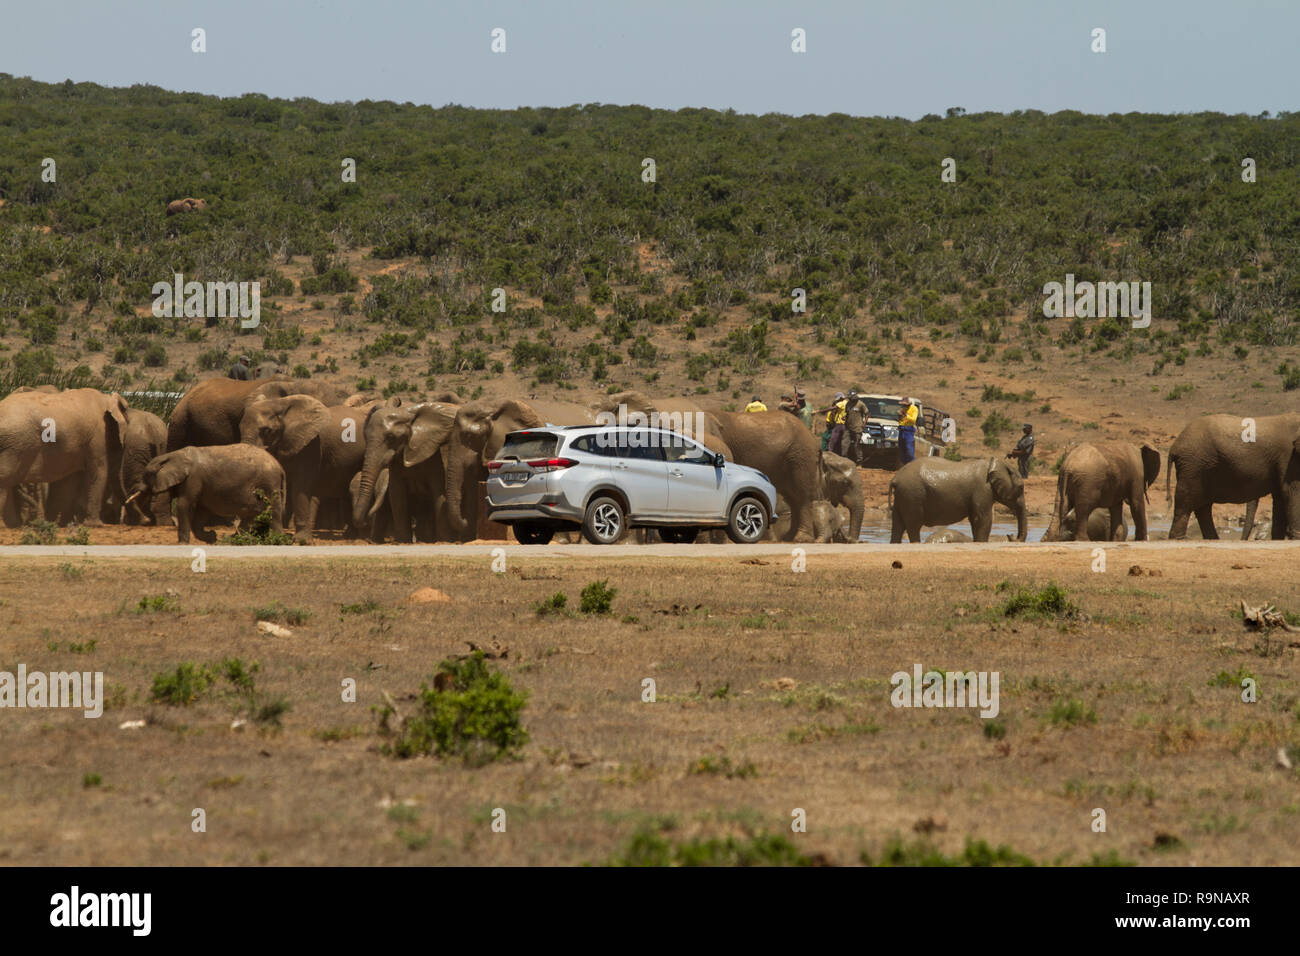 SUV approaches elephants on safari in Addo Elephant National Park, South Africa. A large group of elephants cool off at Hapoor Dam. Stock Photo